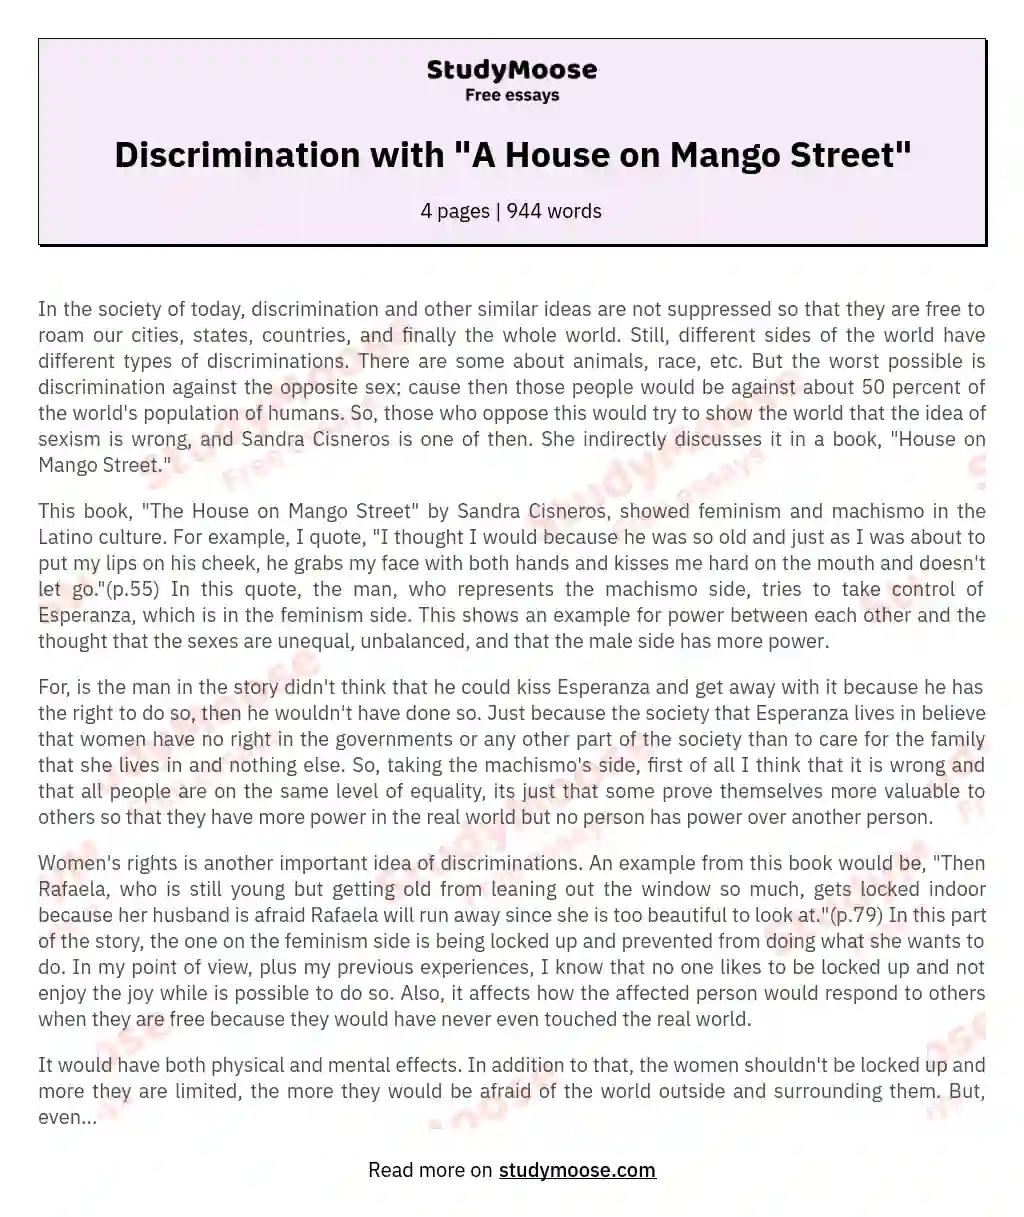 Discrimination with "A House on Mango Street"